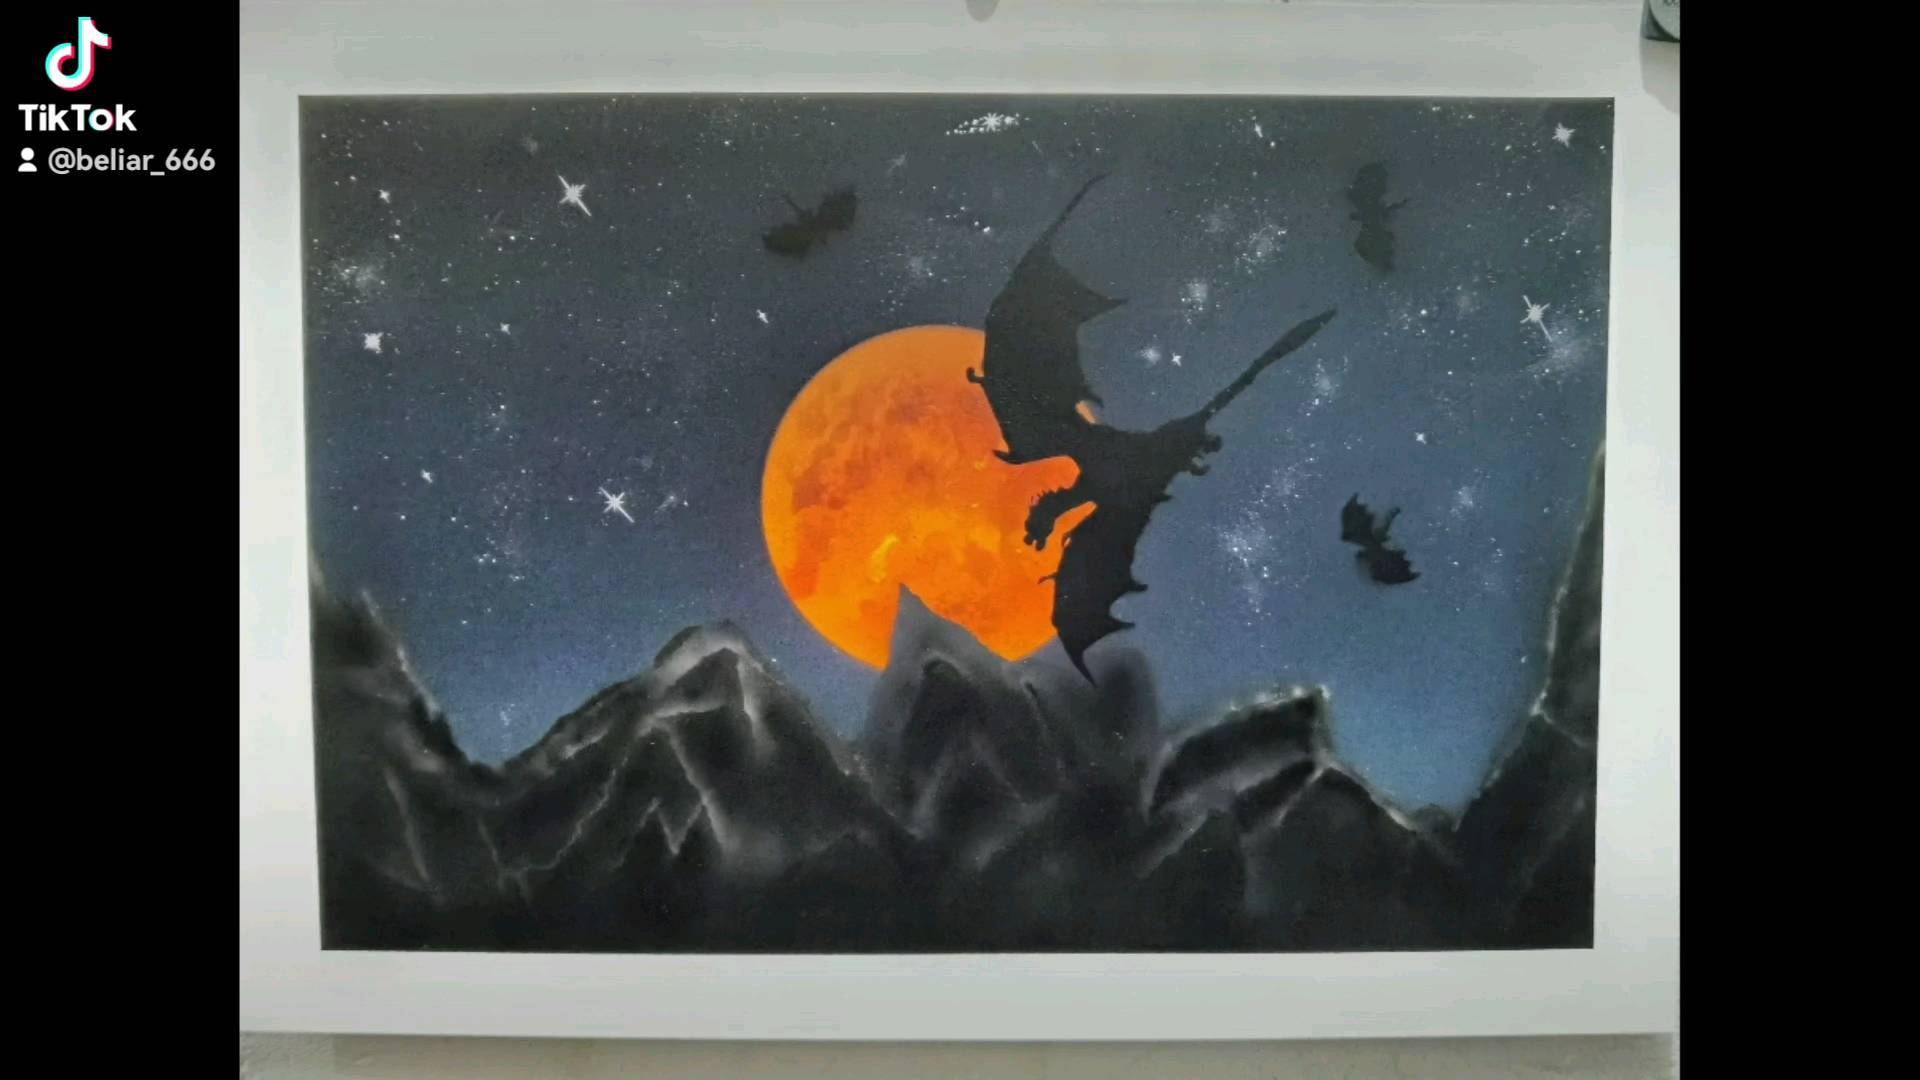 Airbrushart. In den Schritten von Anfang bis Ende.
 Bloodmoon, Dragons and Mountains. Mostly Freehand. My skills got better. Took several hours to complete. Just startet with The moon and did not know what it will be when its finished. Now we have the night of dragons...  #airbrushart #art #kunst #airbrush #airbrushpainting #mountains #bloodmoon #dragons #fantasyart #got #drachen #blutmond #airbrush4you #createx #vallejo #freihand #airbrush #moon #mond #kunst